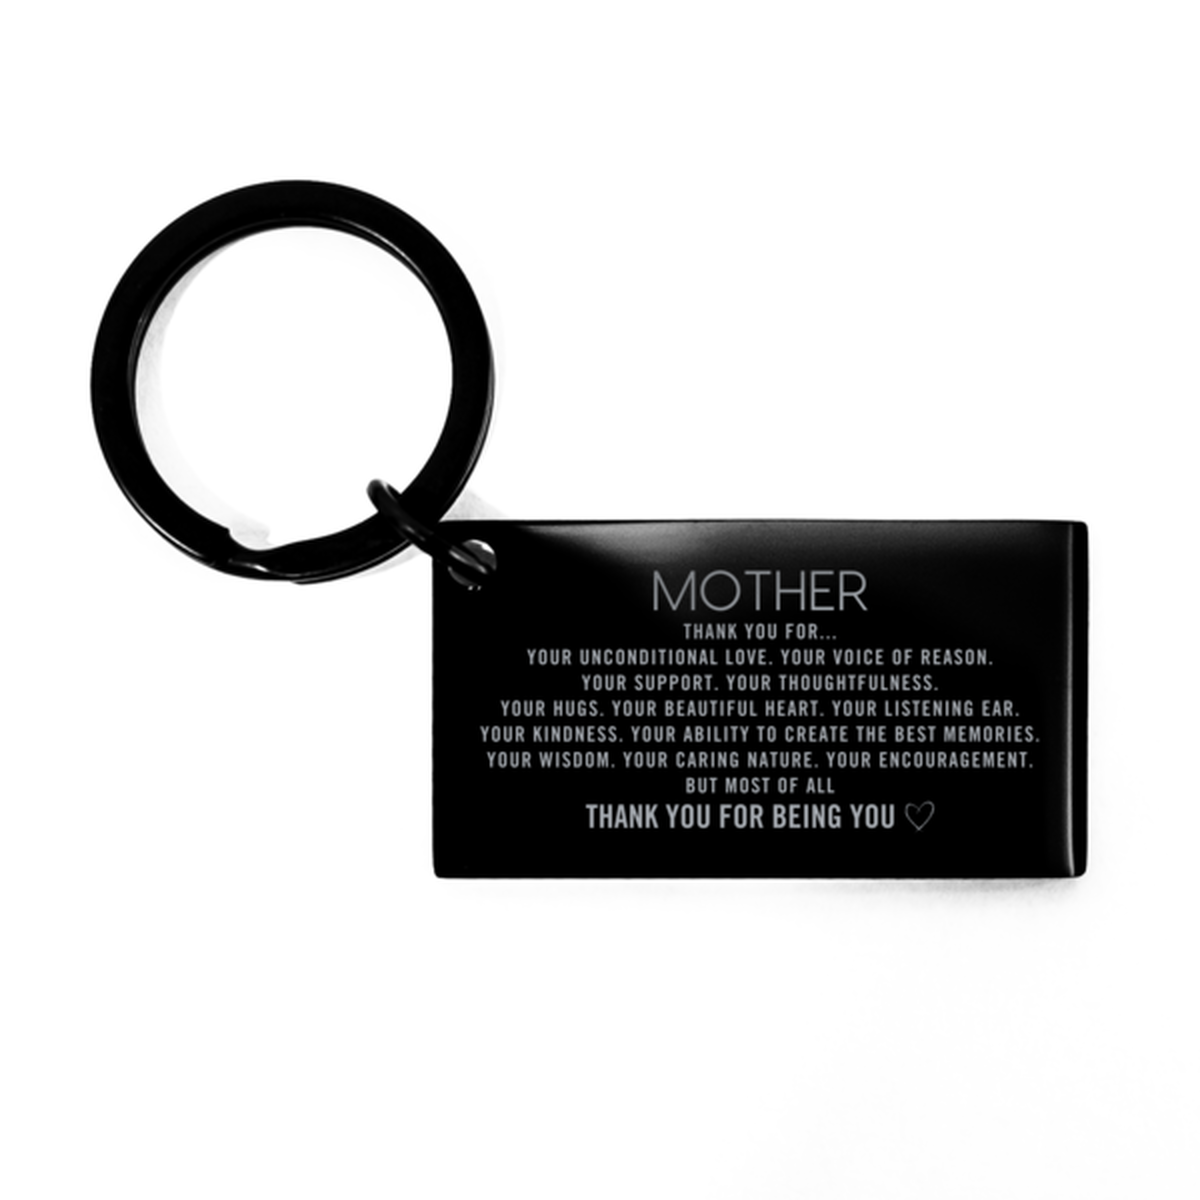 Mother Keychain Custom, Engraved Gifts For Mother Christmas Graduation Birthday Gifts for Men Women Mother Thank you for Your unconditional love